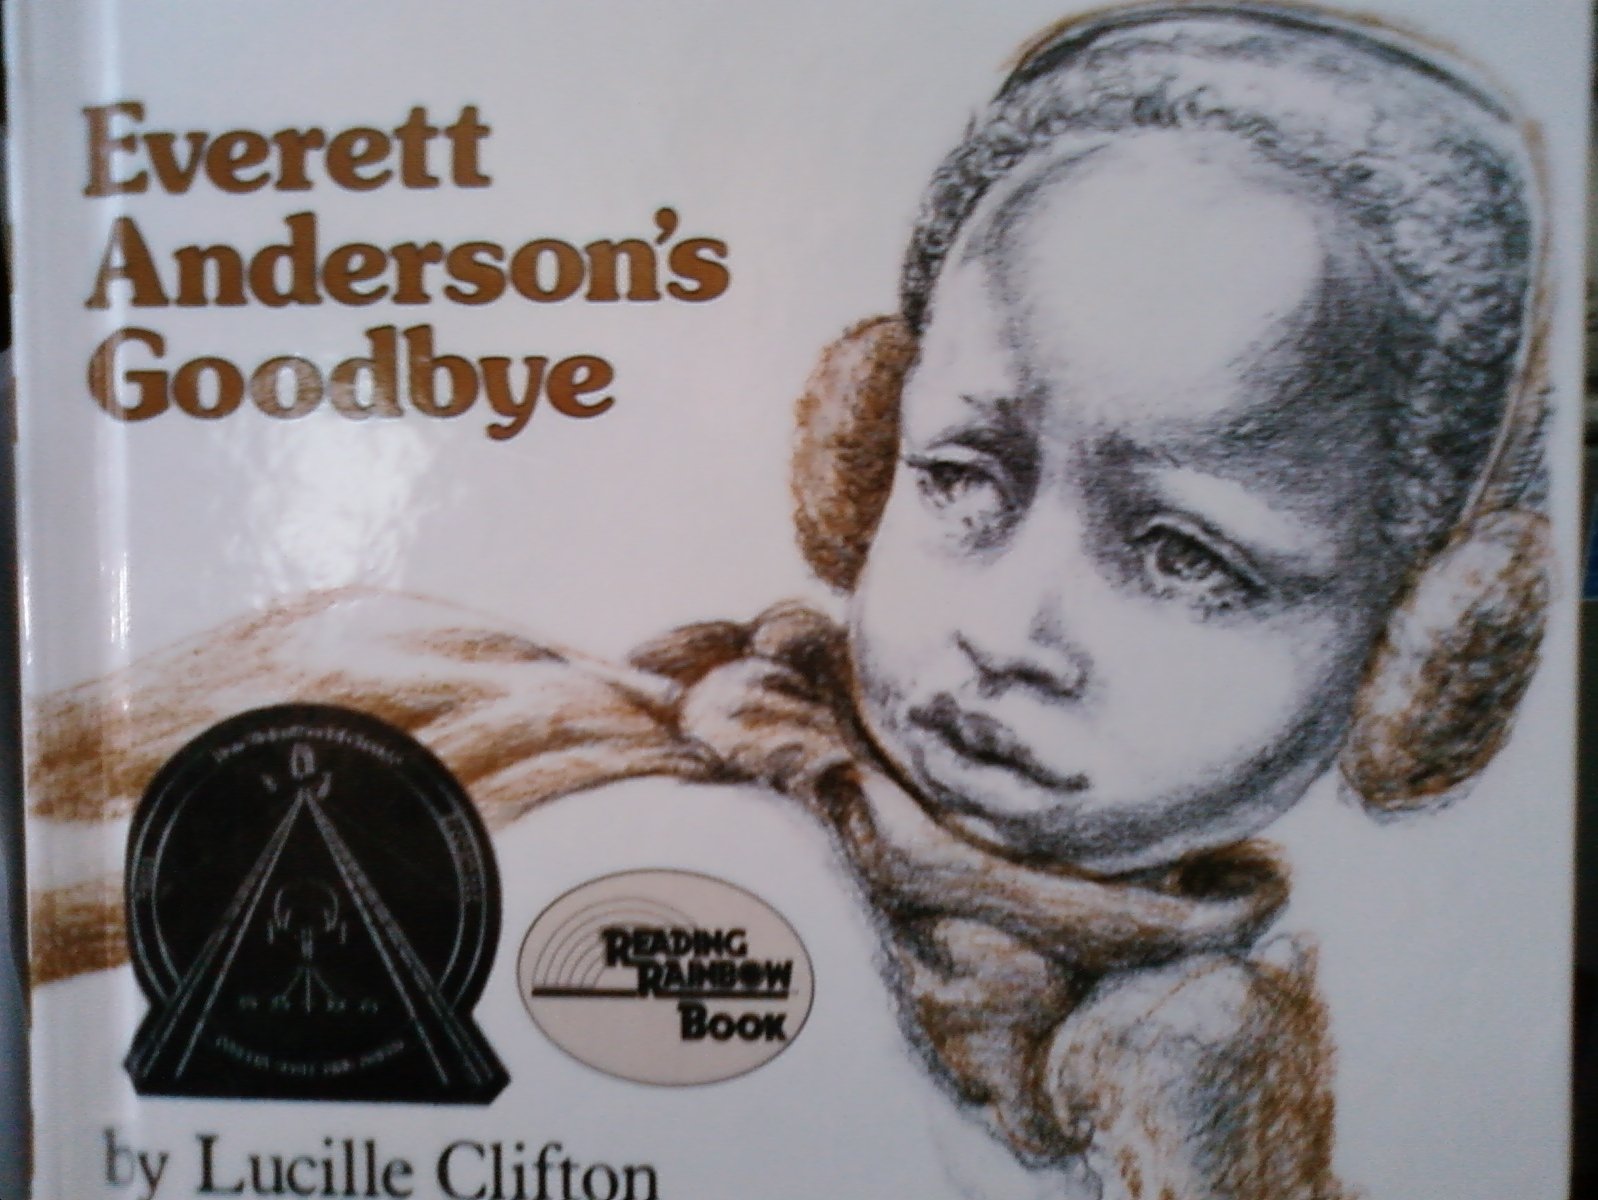 Everett Anderson’s Goodbye (1983) – Lucille Clifton